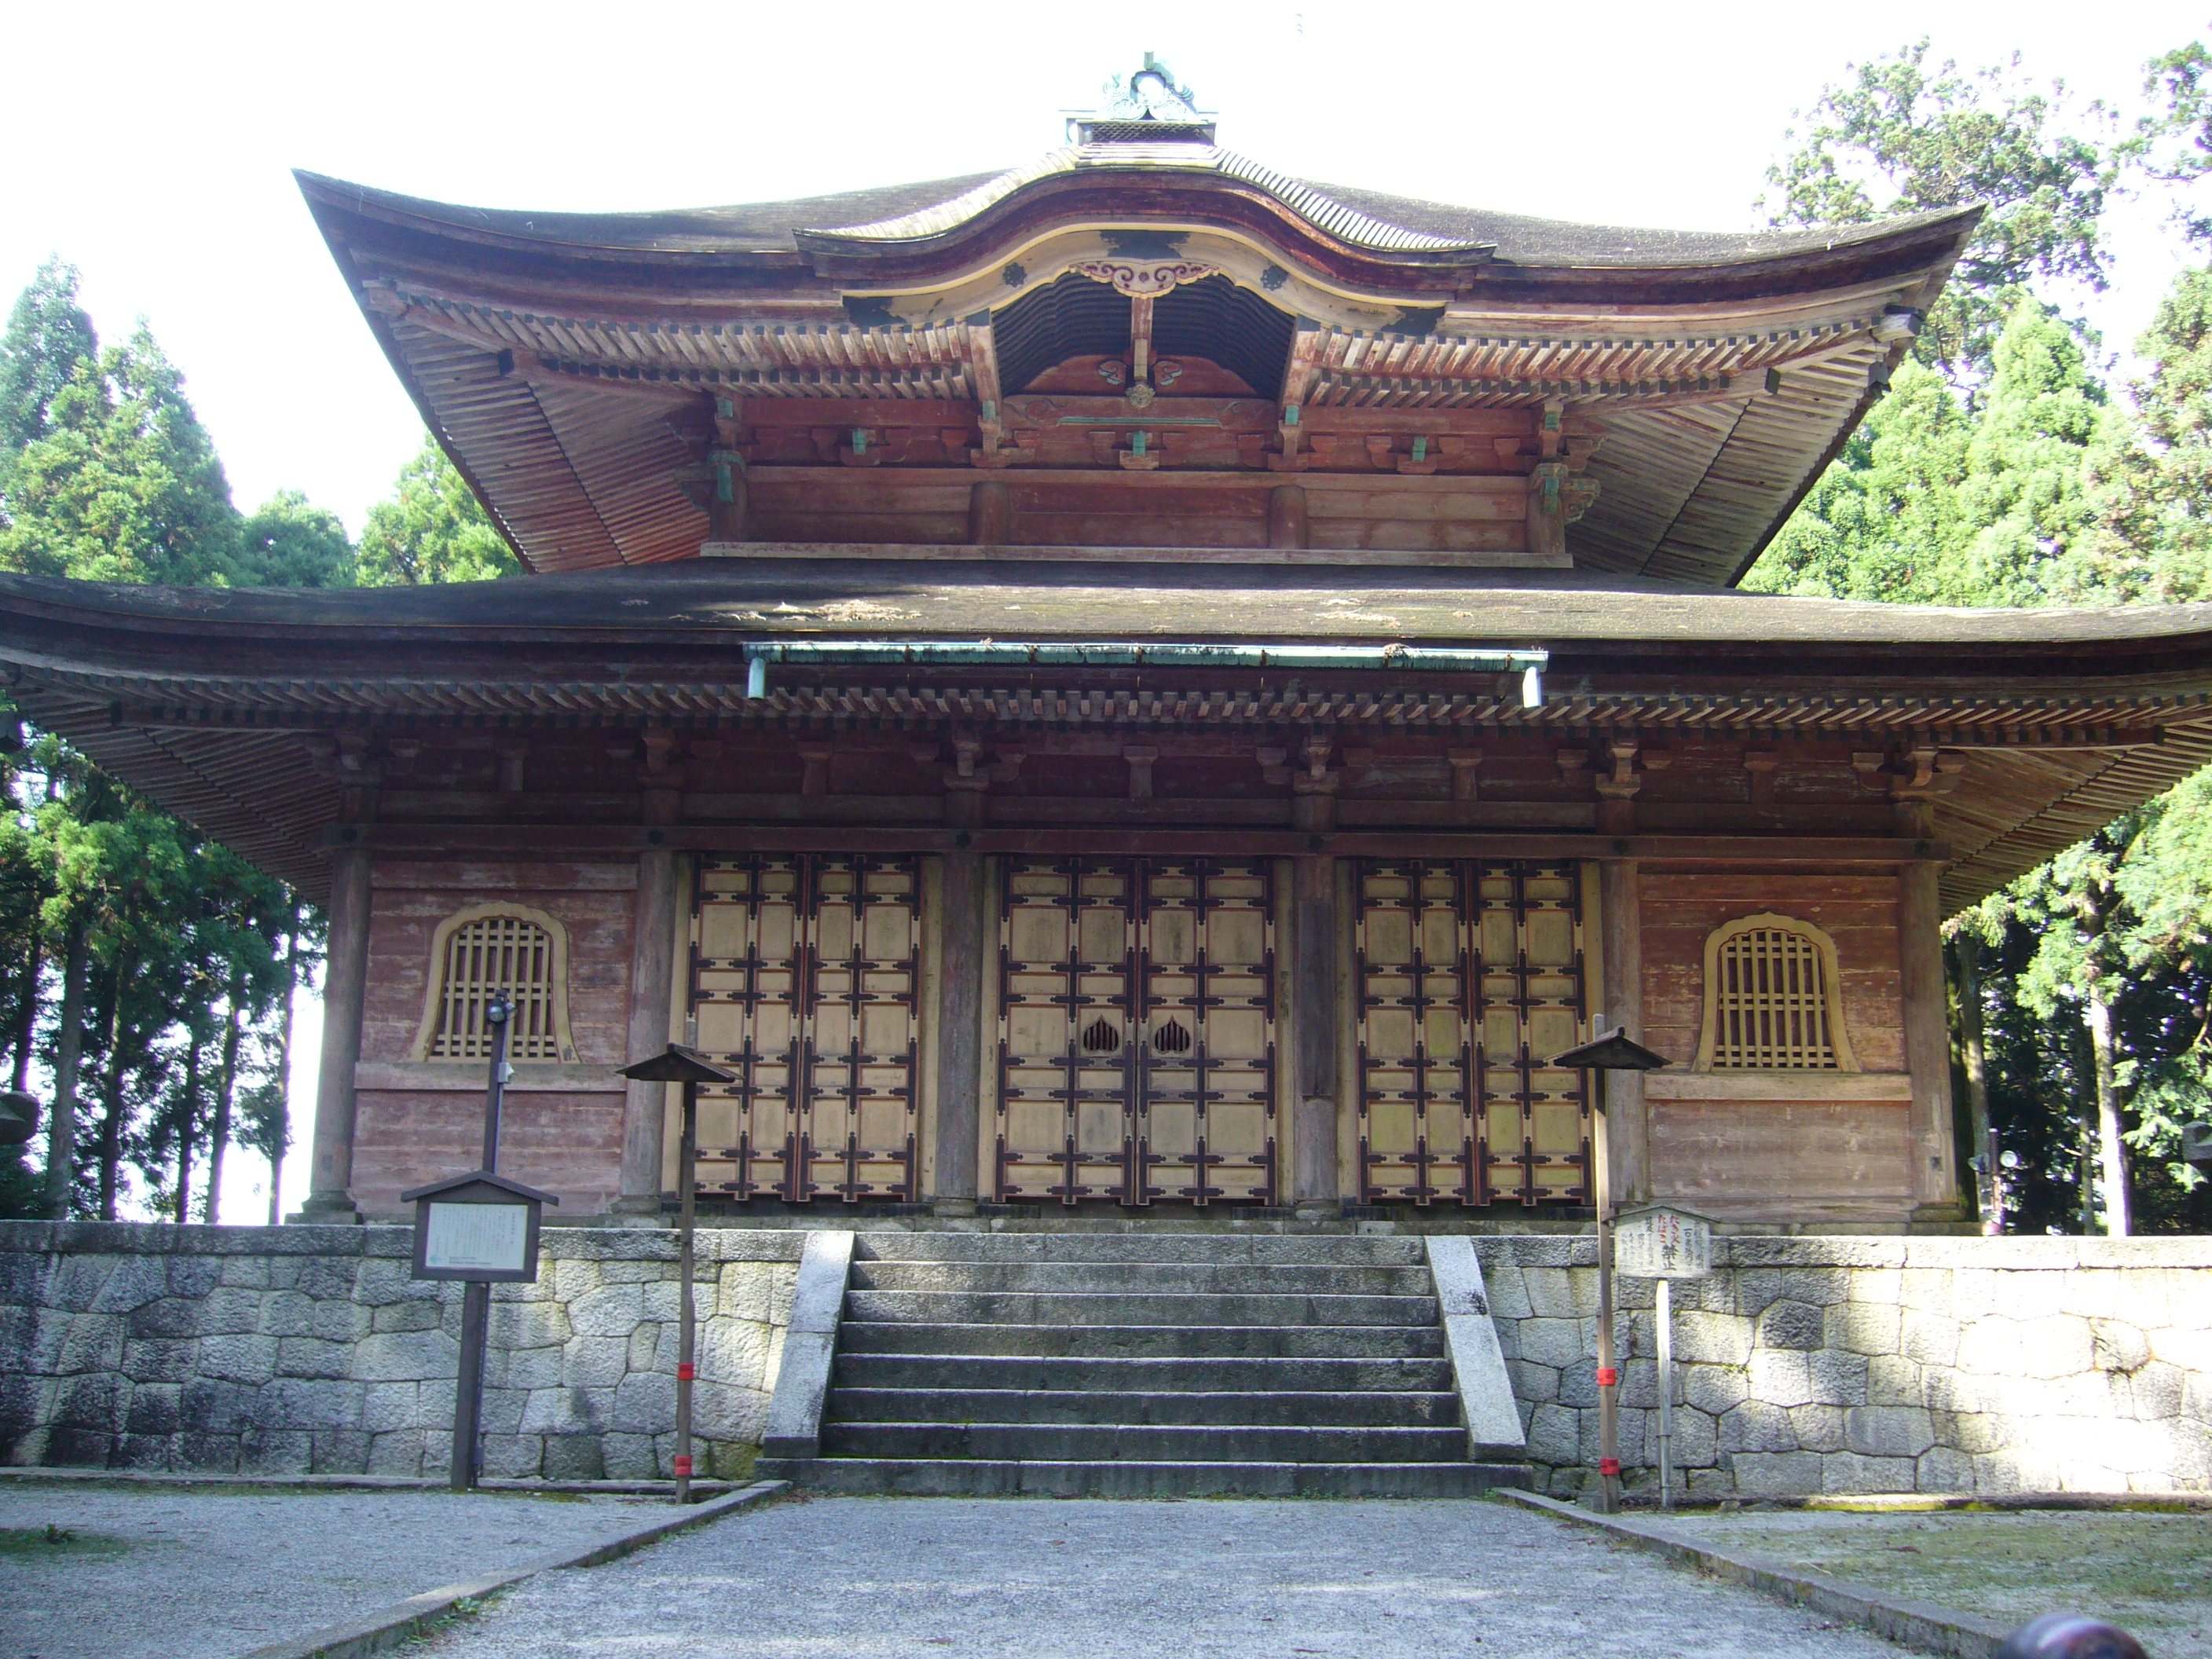 Old temple at Enryakuji on Mt. Hiei in Kyoto. Photo by Doug Berger, September 2007. Click the photo to send an e-mail.